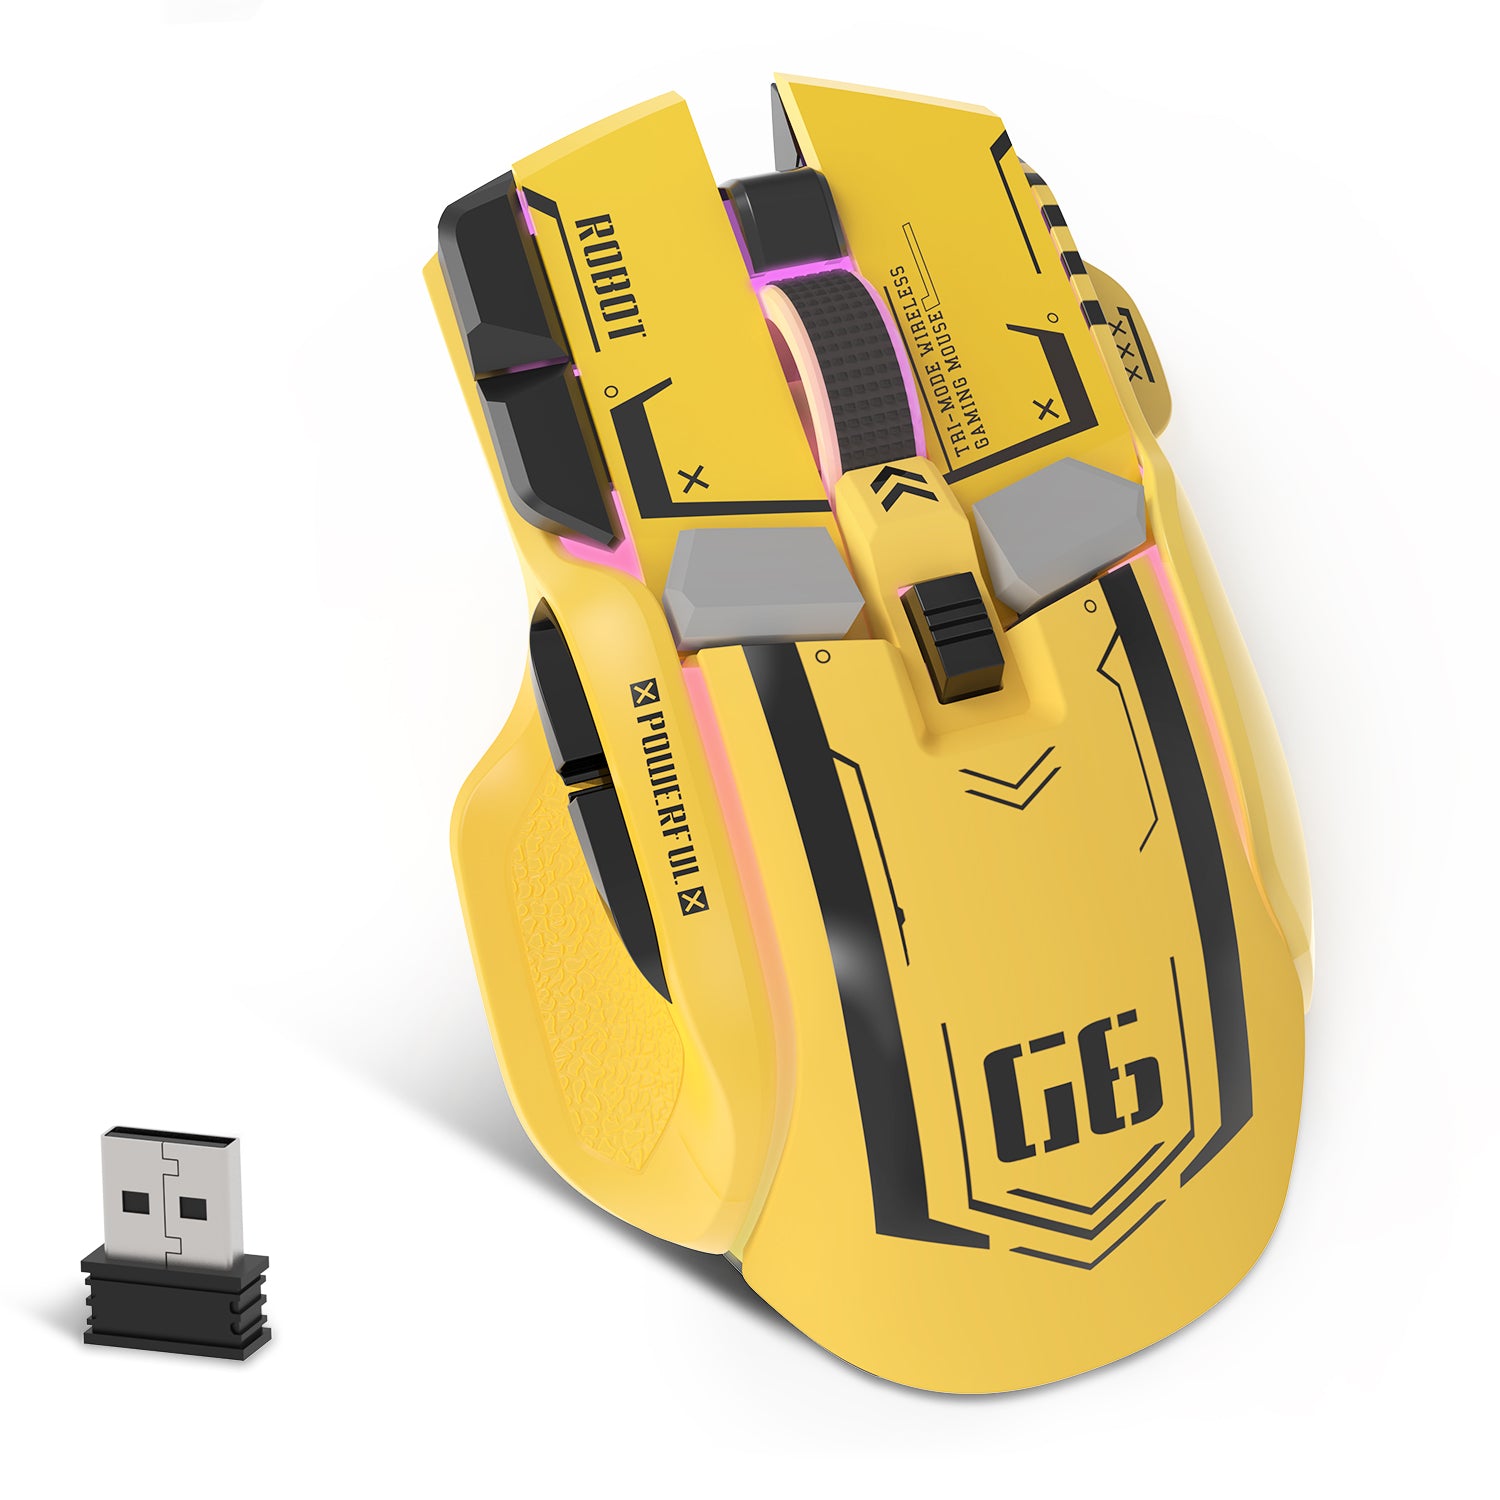 KUIYN G6 Tri Mode Mouse, Type-C Wired 2.4G Wireless Bluetooth Mouse wi